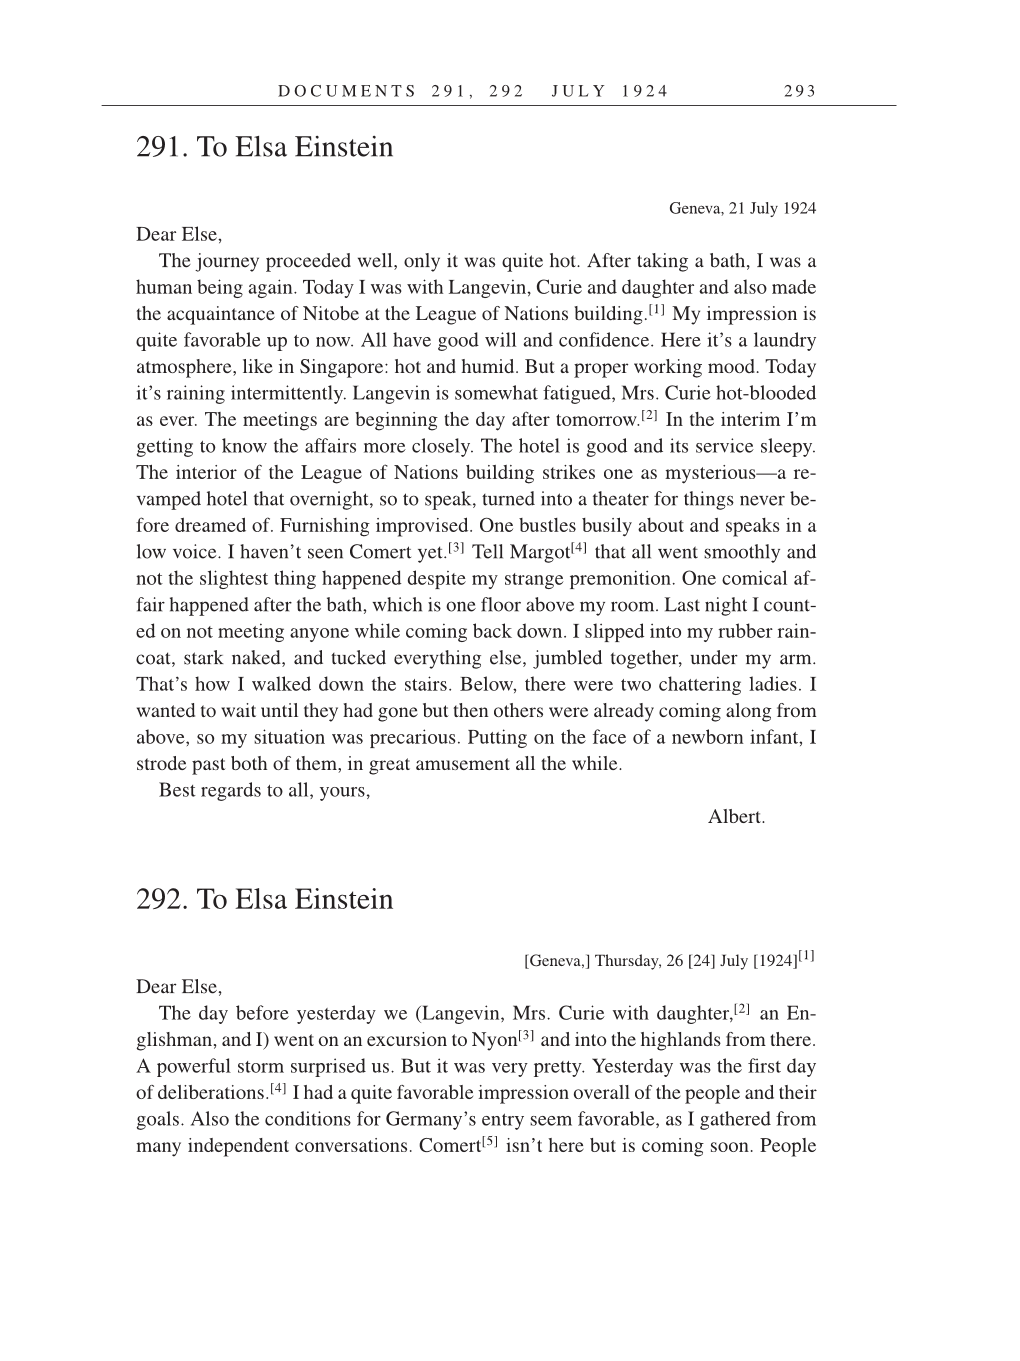 Volume 14: The Berlin Years: Writings & Correspondence, April 1923-May 1925 (English Translation Supplement) page 293